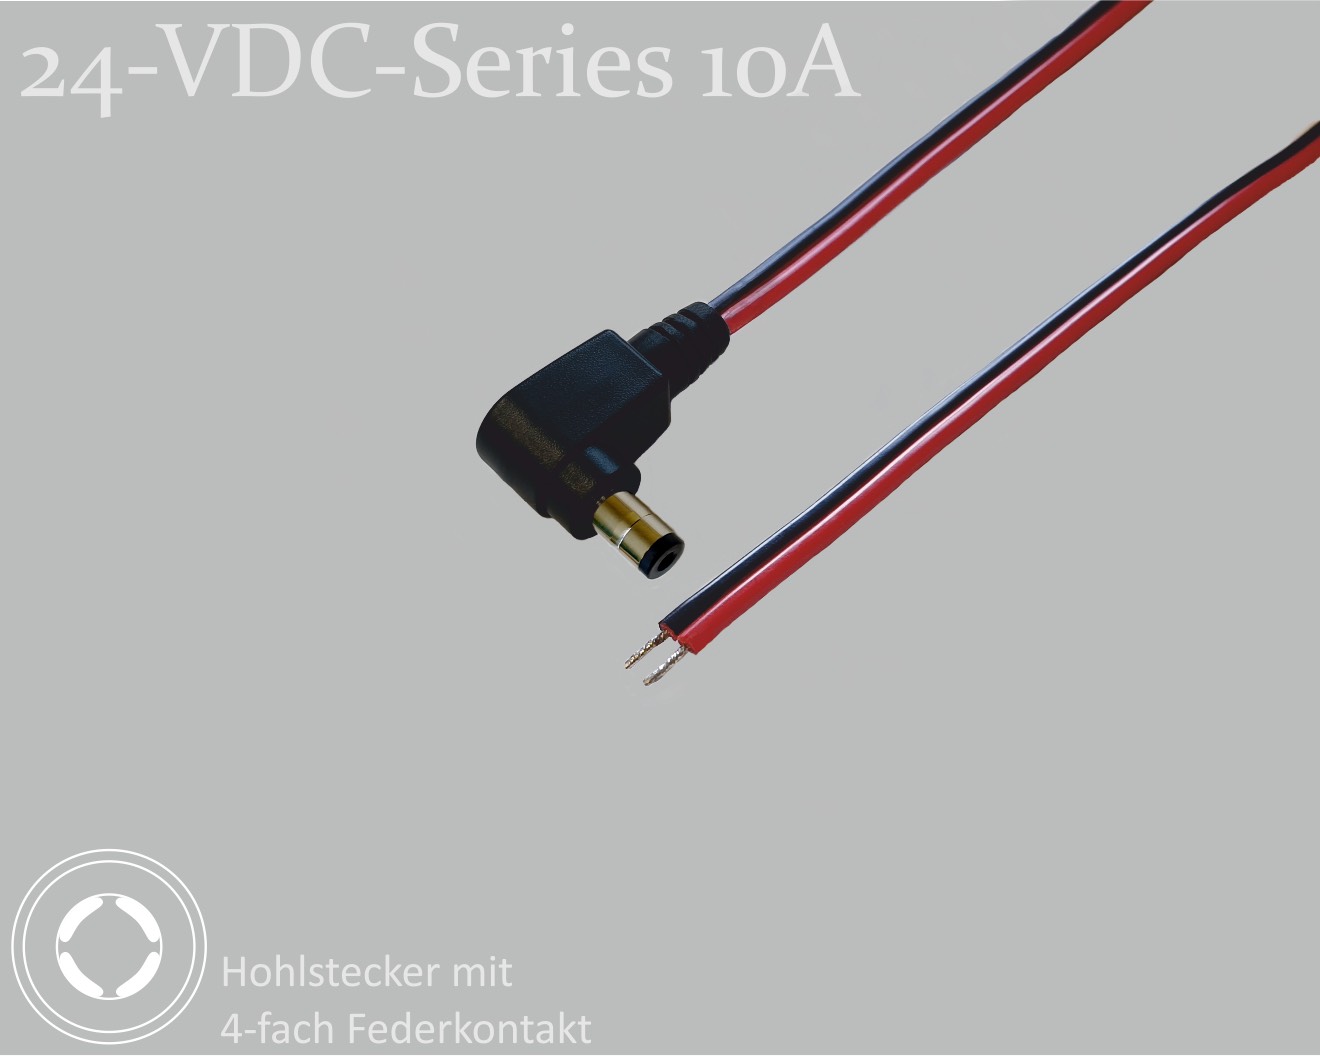 24-VDC-Series 10A, DC connection cable, DC right-angle plug with 4-spring contact 2.1x5.5x9.5mm, flat cable 2x0.75mm², red/black, tinned ends, 1.5m